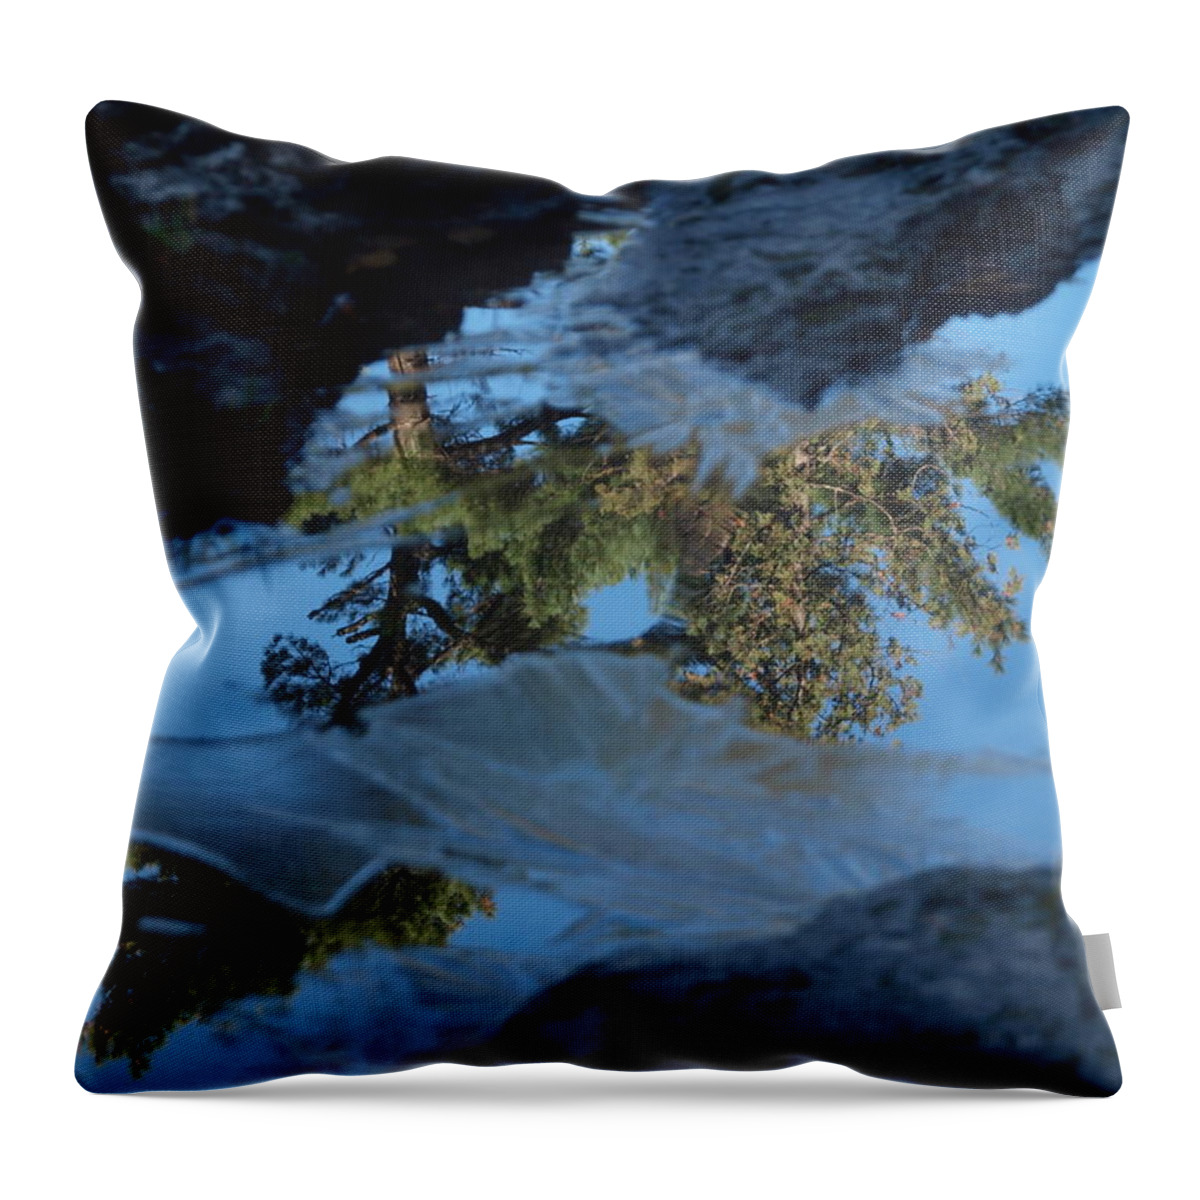 Jim Throw Pillow featuring the photograph Icy Evergreen Reflection by James Peterson